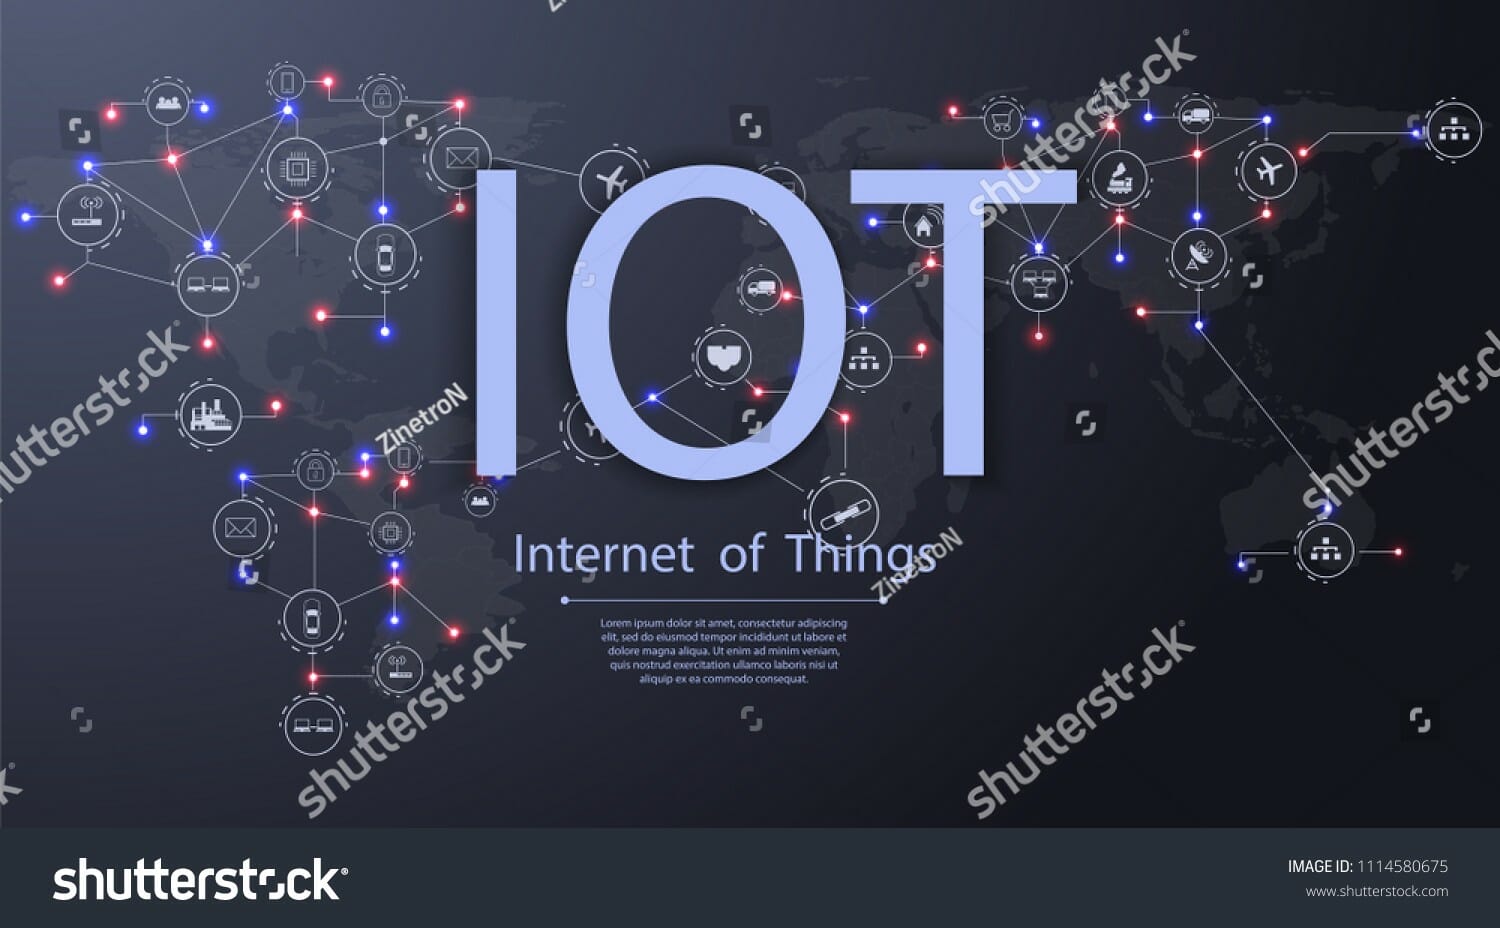 Internet of things (IoT) concept.